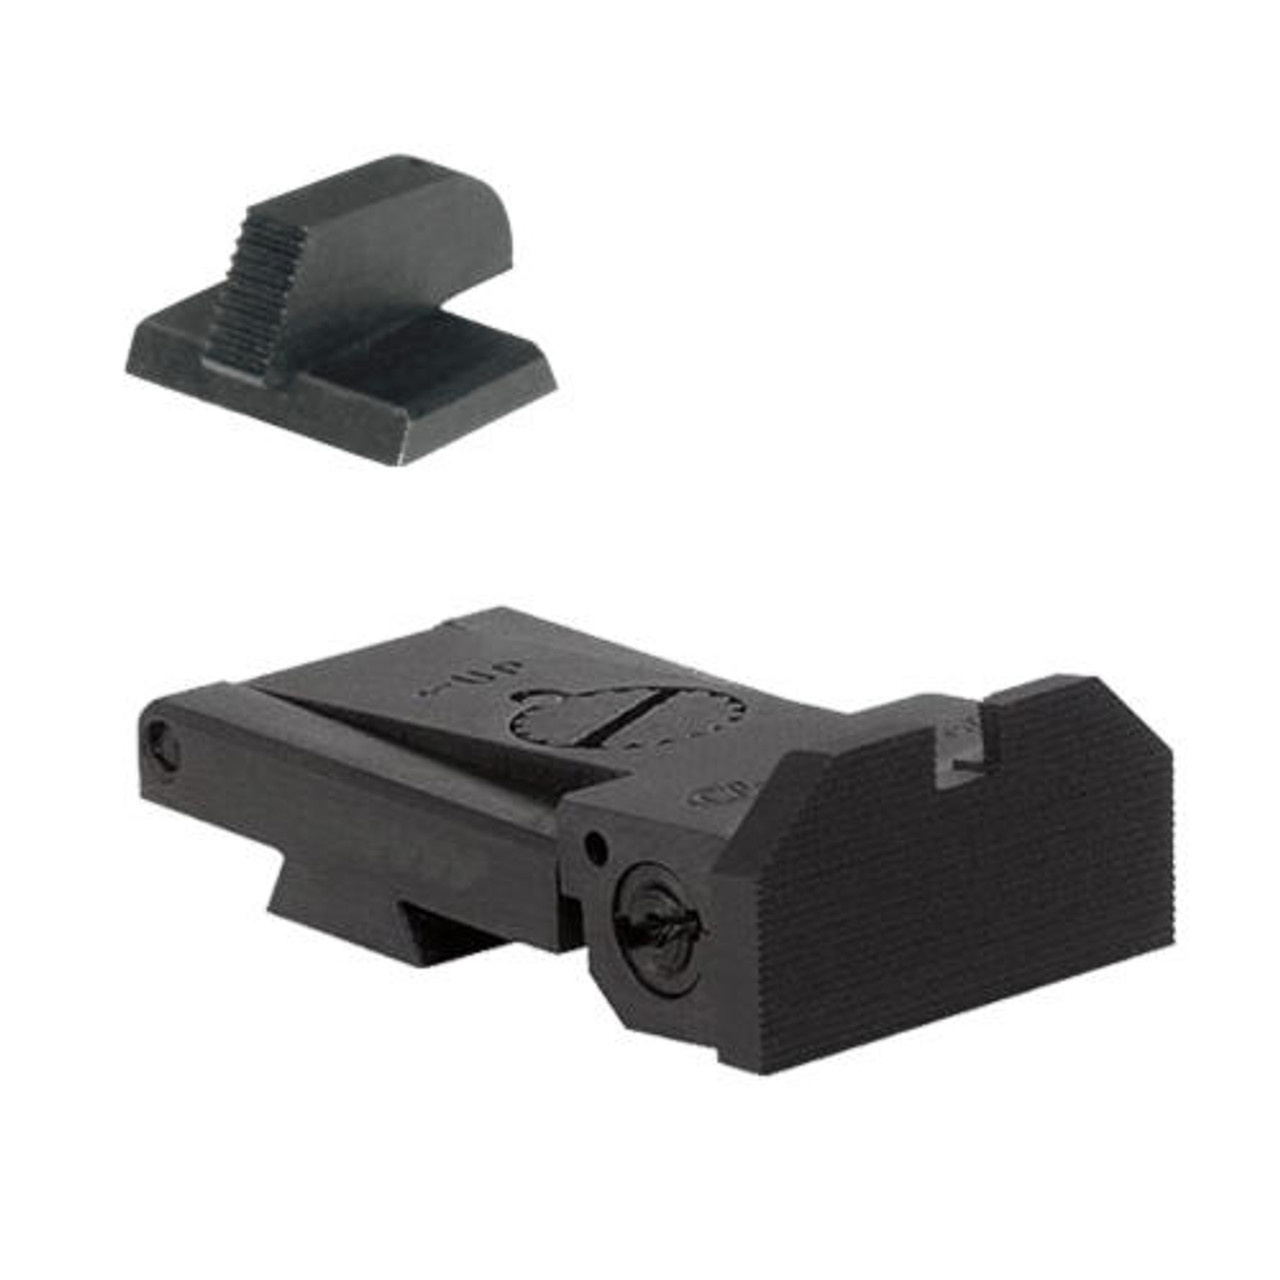 Kensight Kensight Target 1911 Sights with Beveled Blade - Fits Bomar BMCS  Sight Dovetail Cut